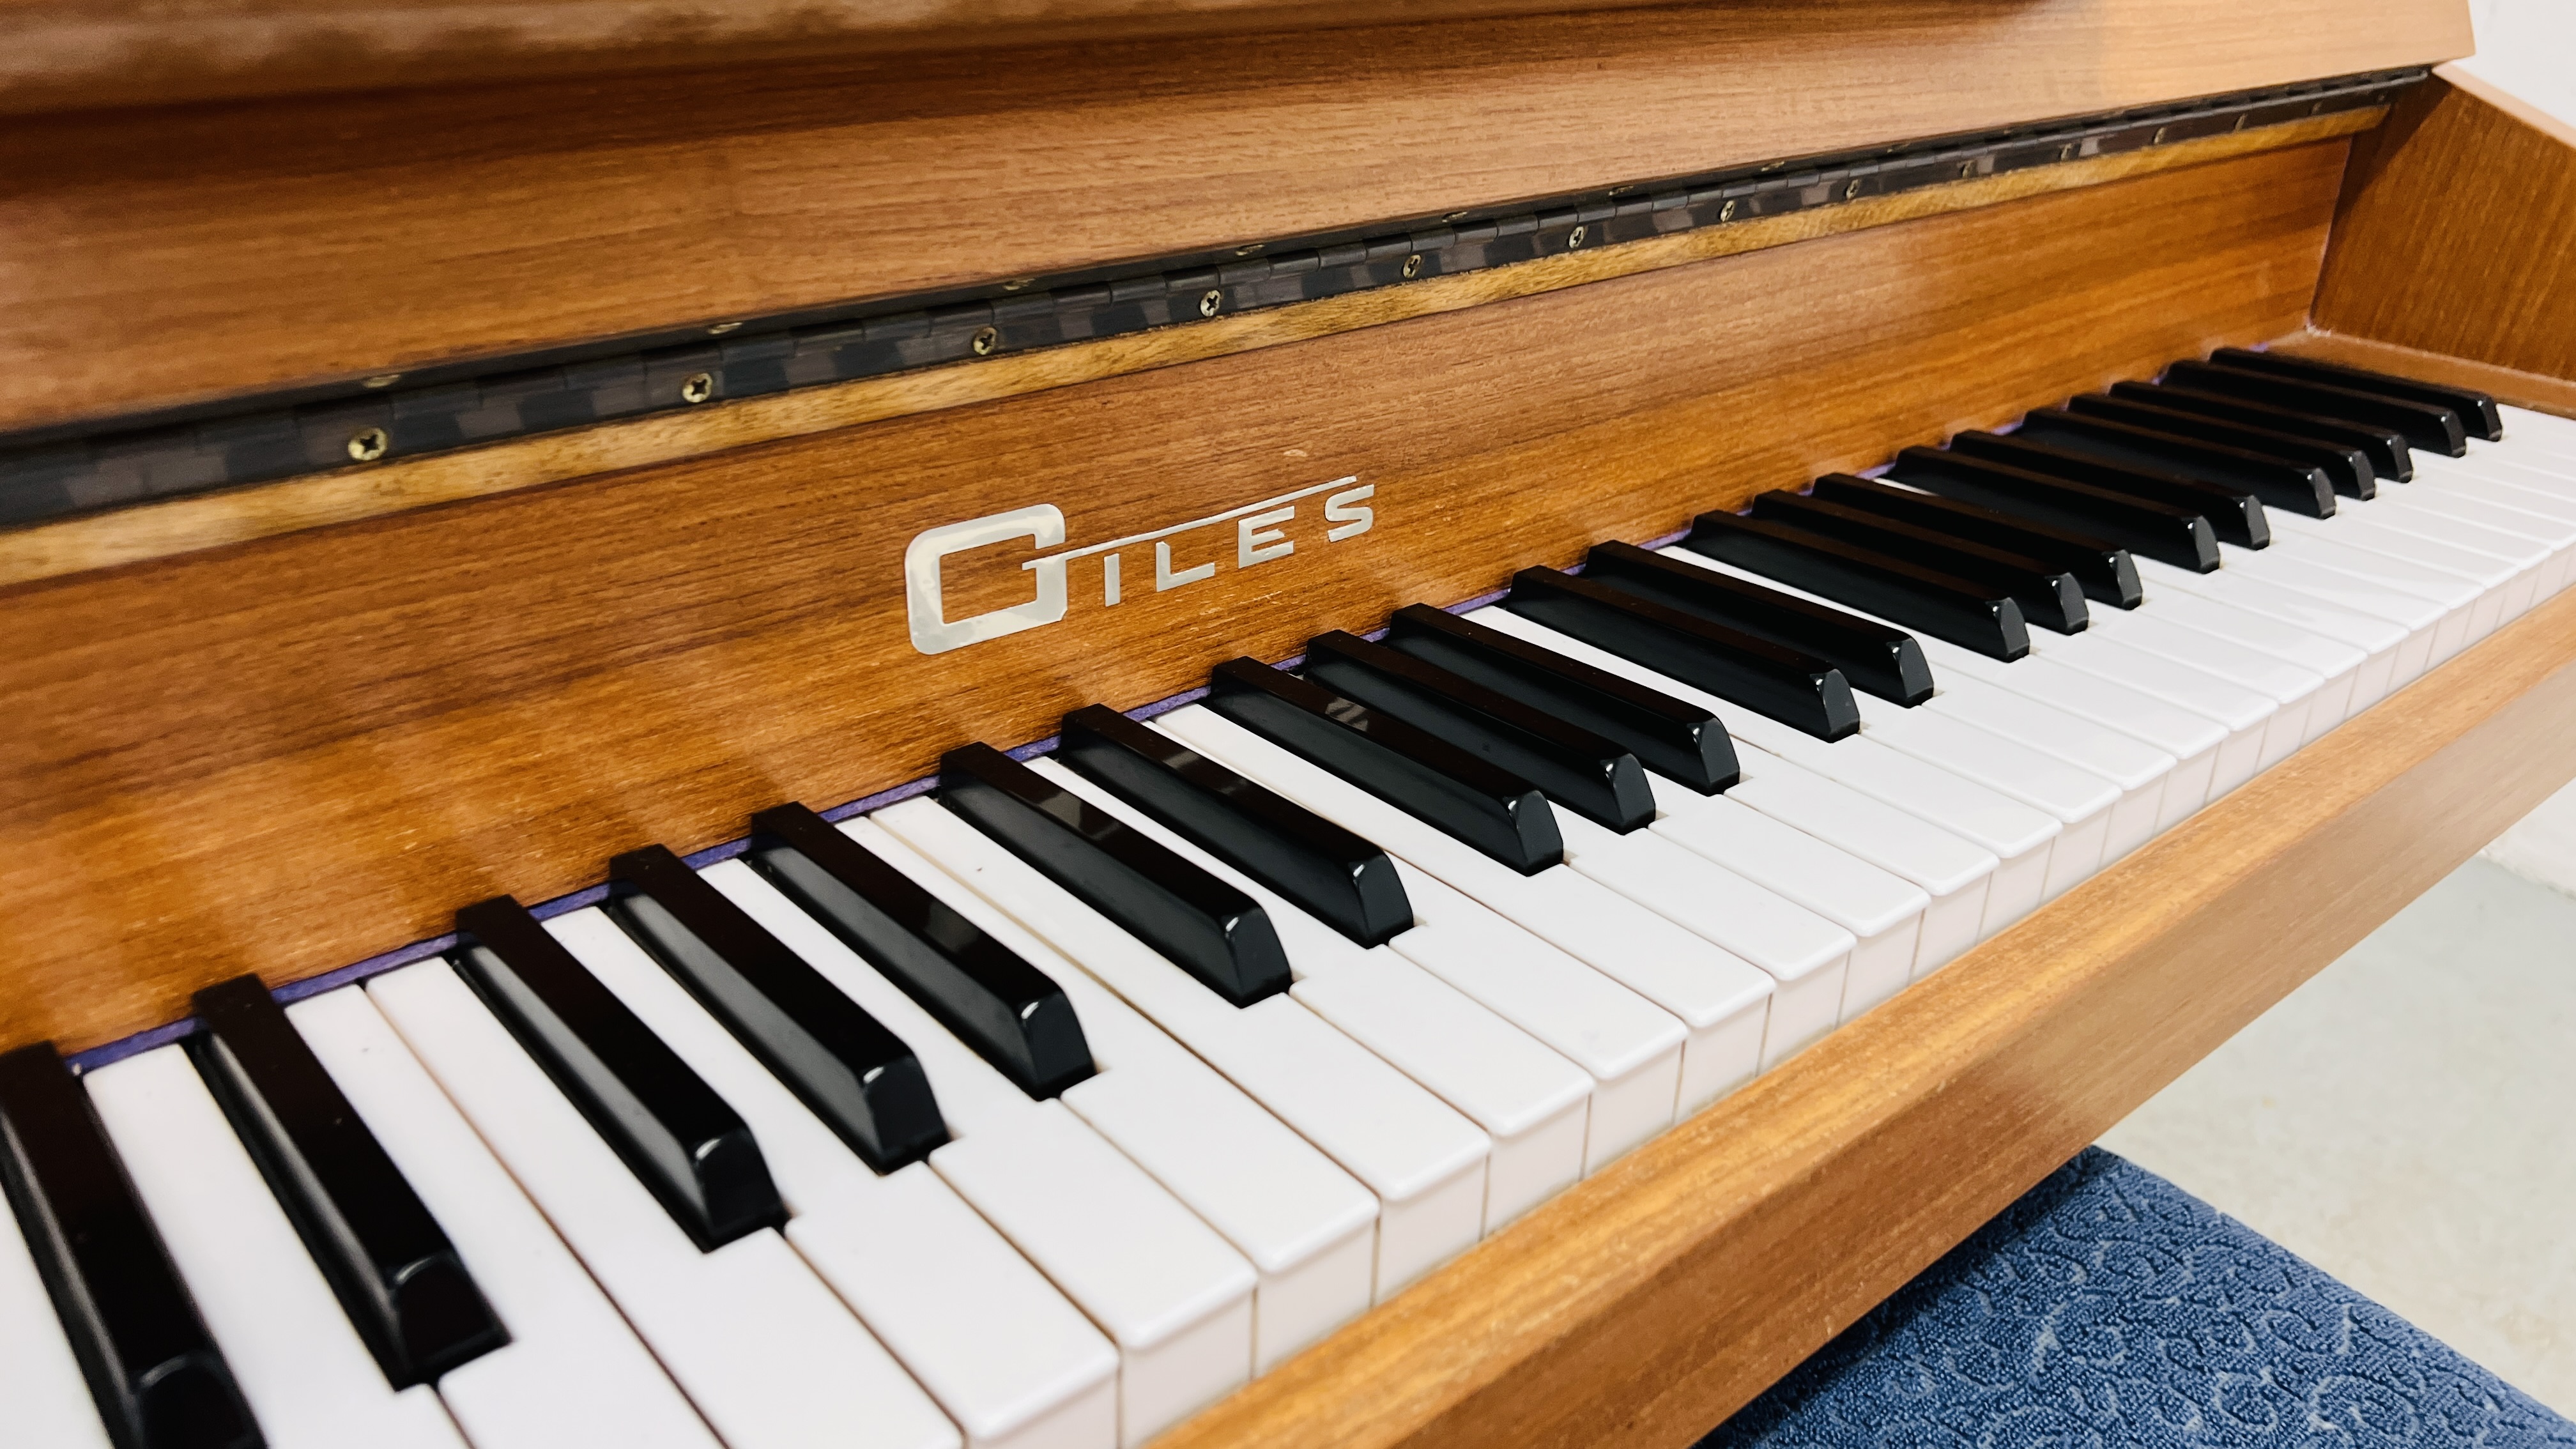 A GILES MODERN OVERSTRUNG UPRIGHT PIANO COMPLETE WITH MUSIC STOOL - Image 4 of 14